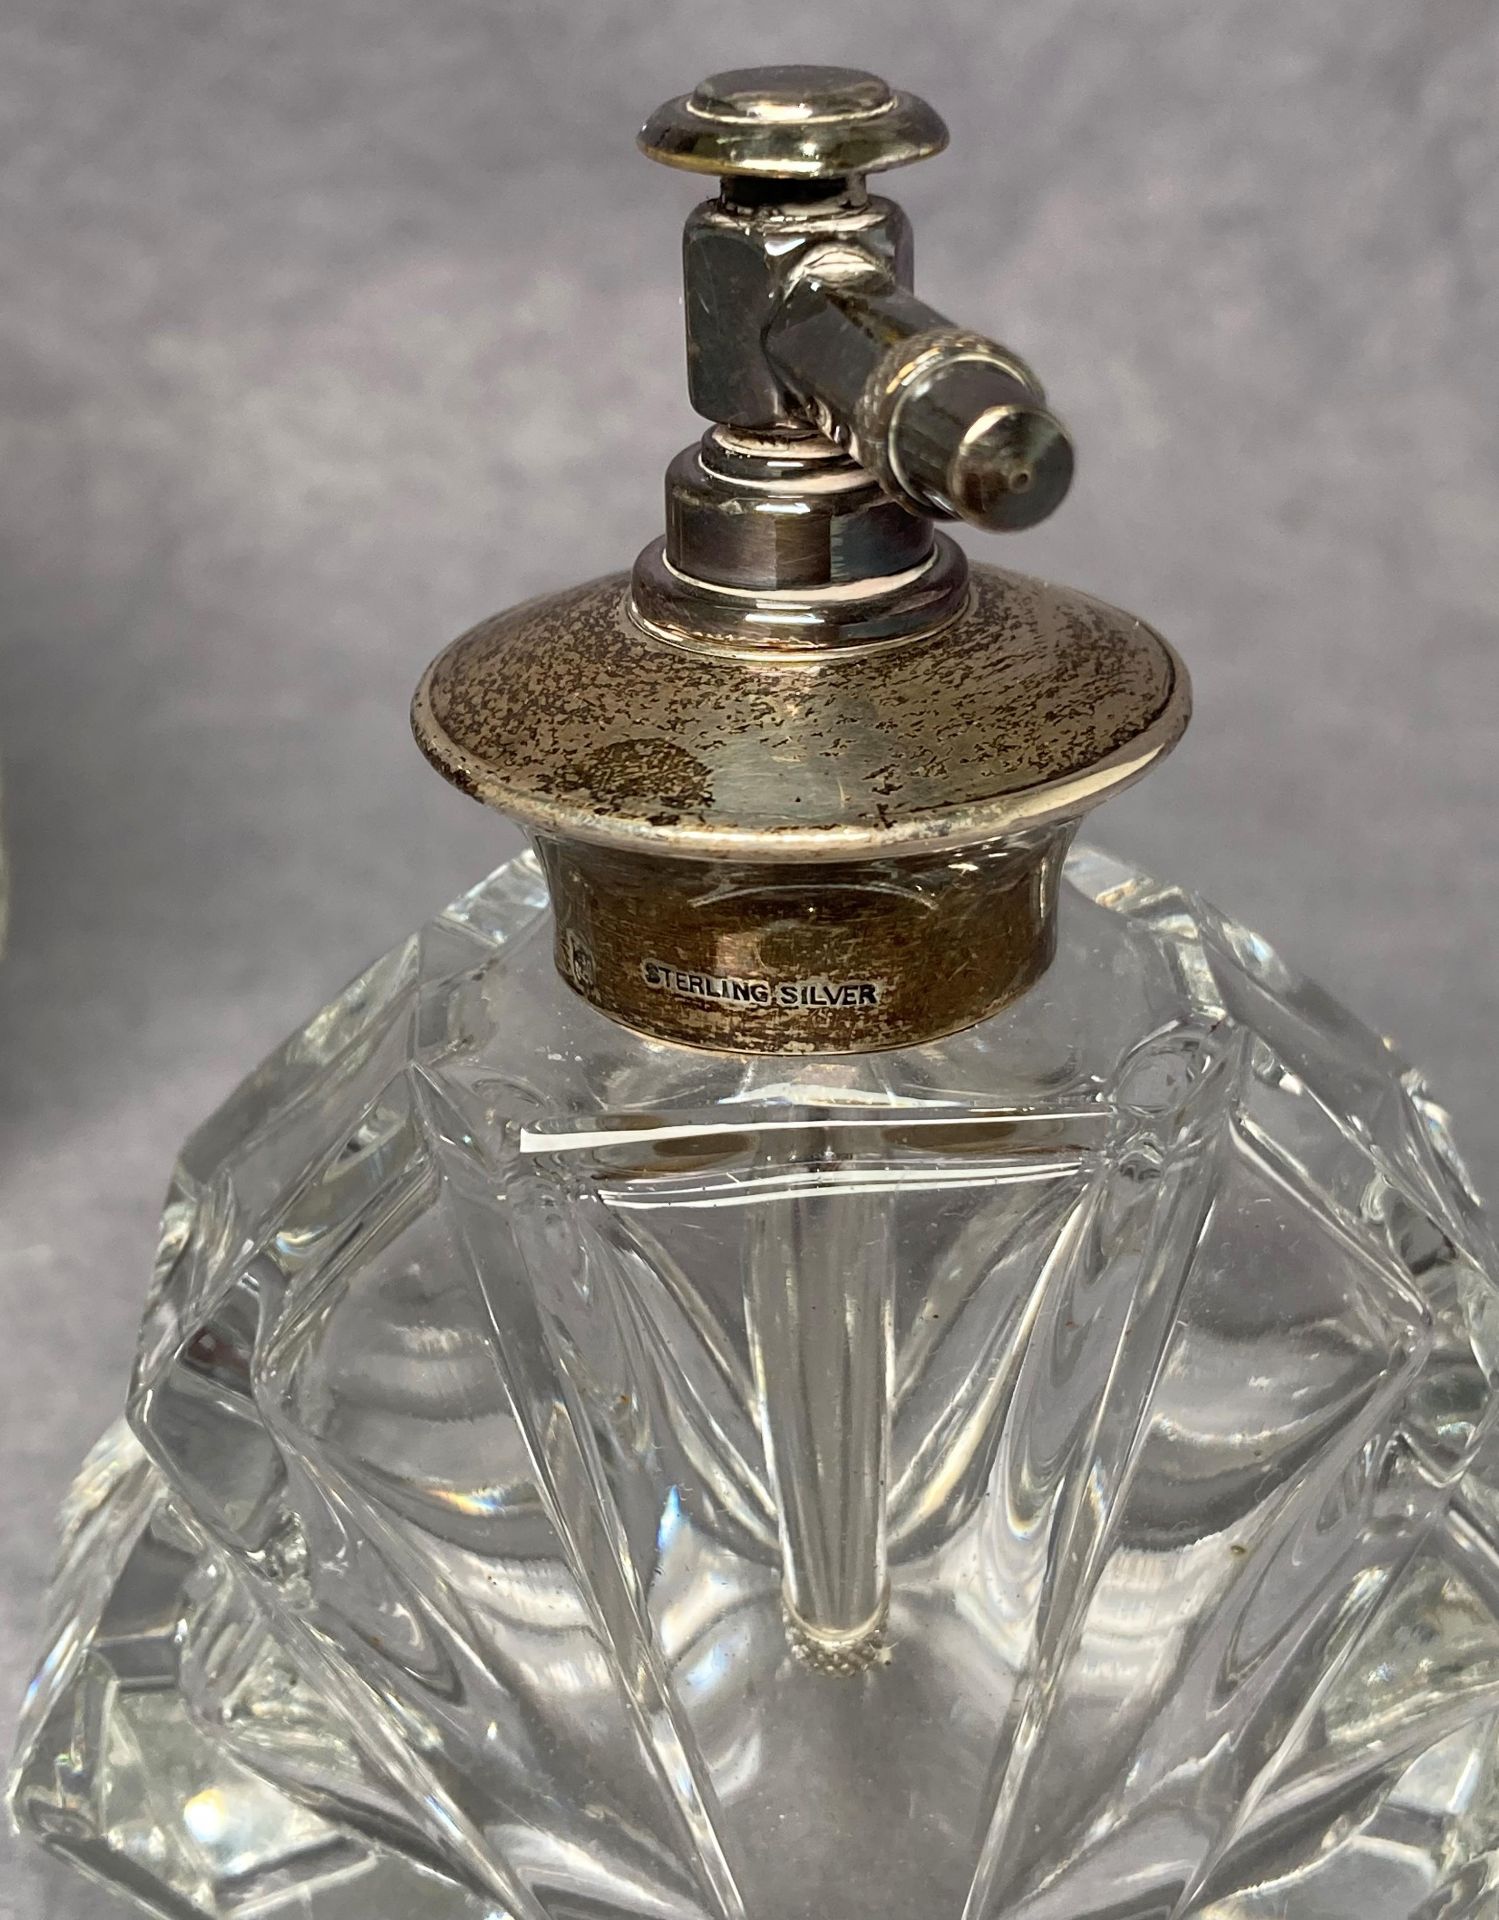 Two vintage perfume crystal/glass bottles with Sterling Silver tops/pumps (9cm and 14cm high) and a - Image 4 of 5